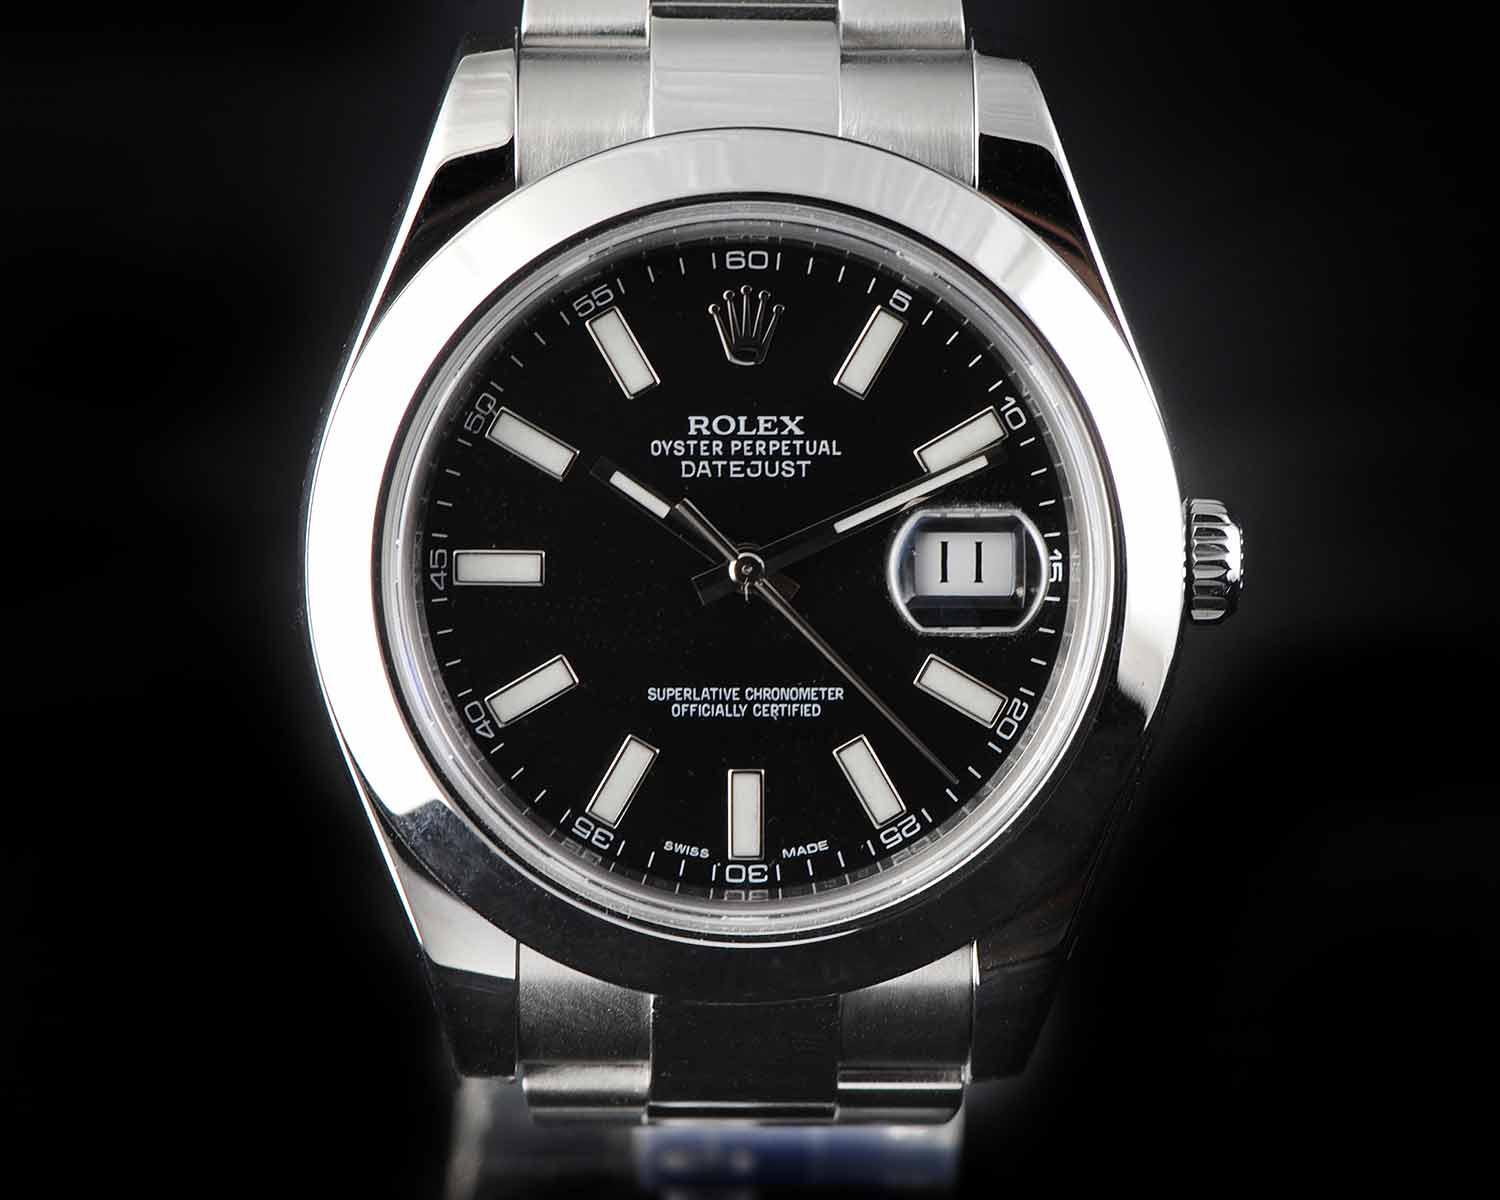 ROLEX DATEJUST II OYSTER PERPETUAL 116300 STAINLESS STEEL WATCH